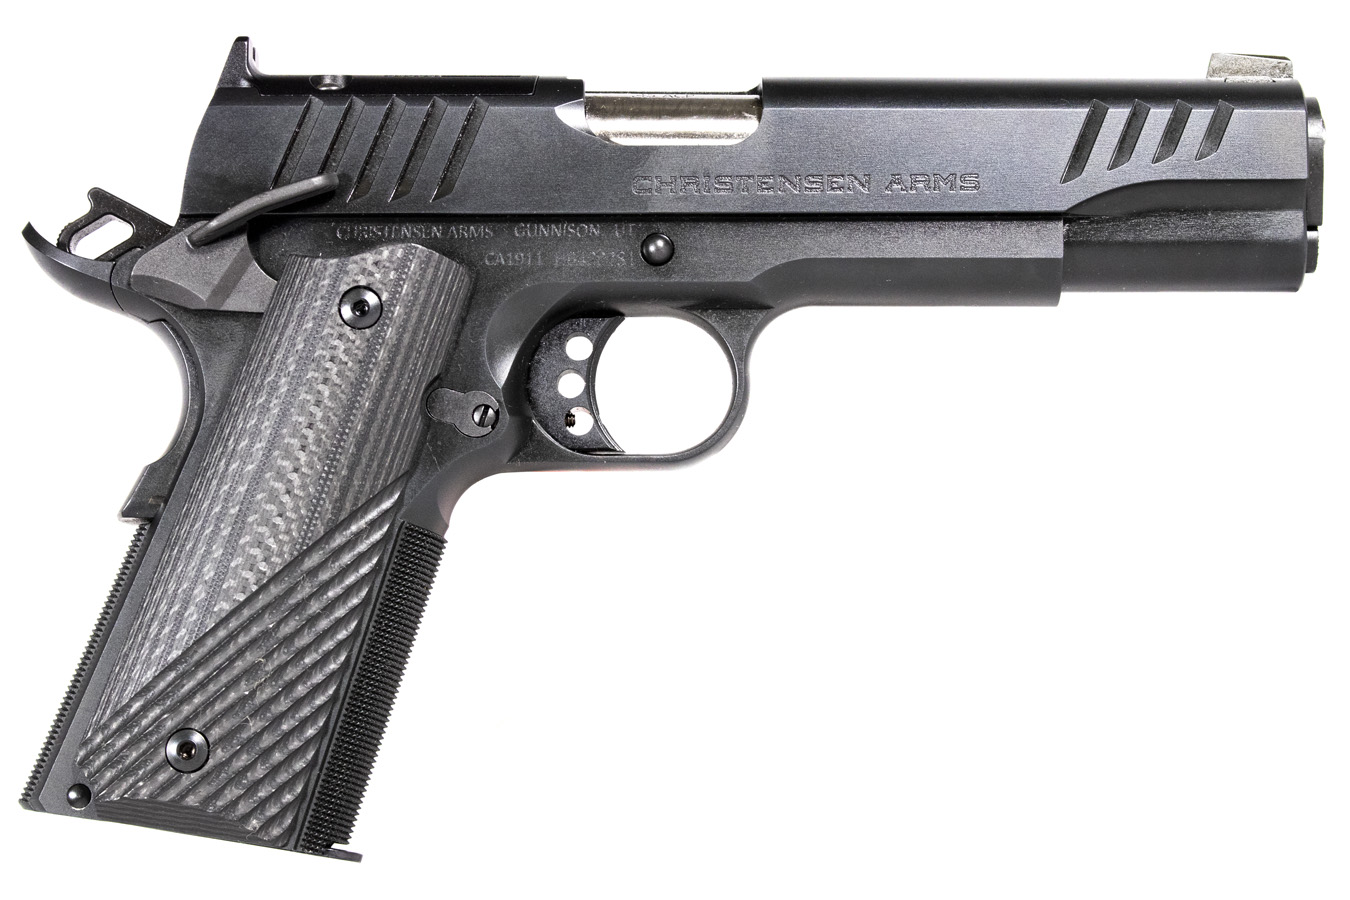 No. 19 Best Selling: CHRISTENSEN ARMS CA1911 45 ACP PISTOL WITH 5 INCH BARREL